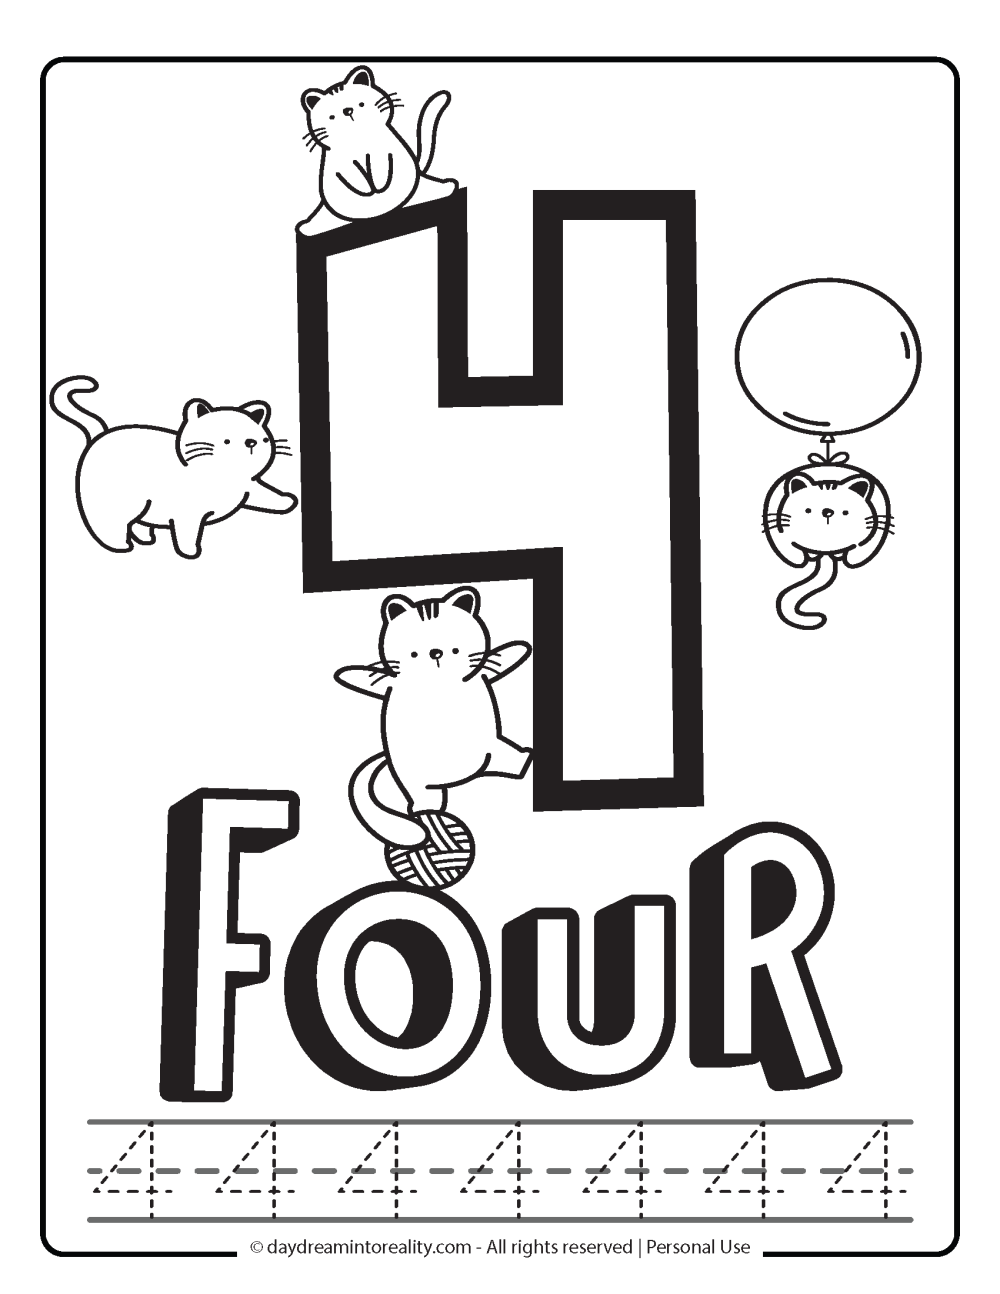 coloring page number 4 free printable with tracing.